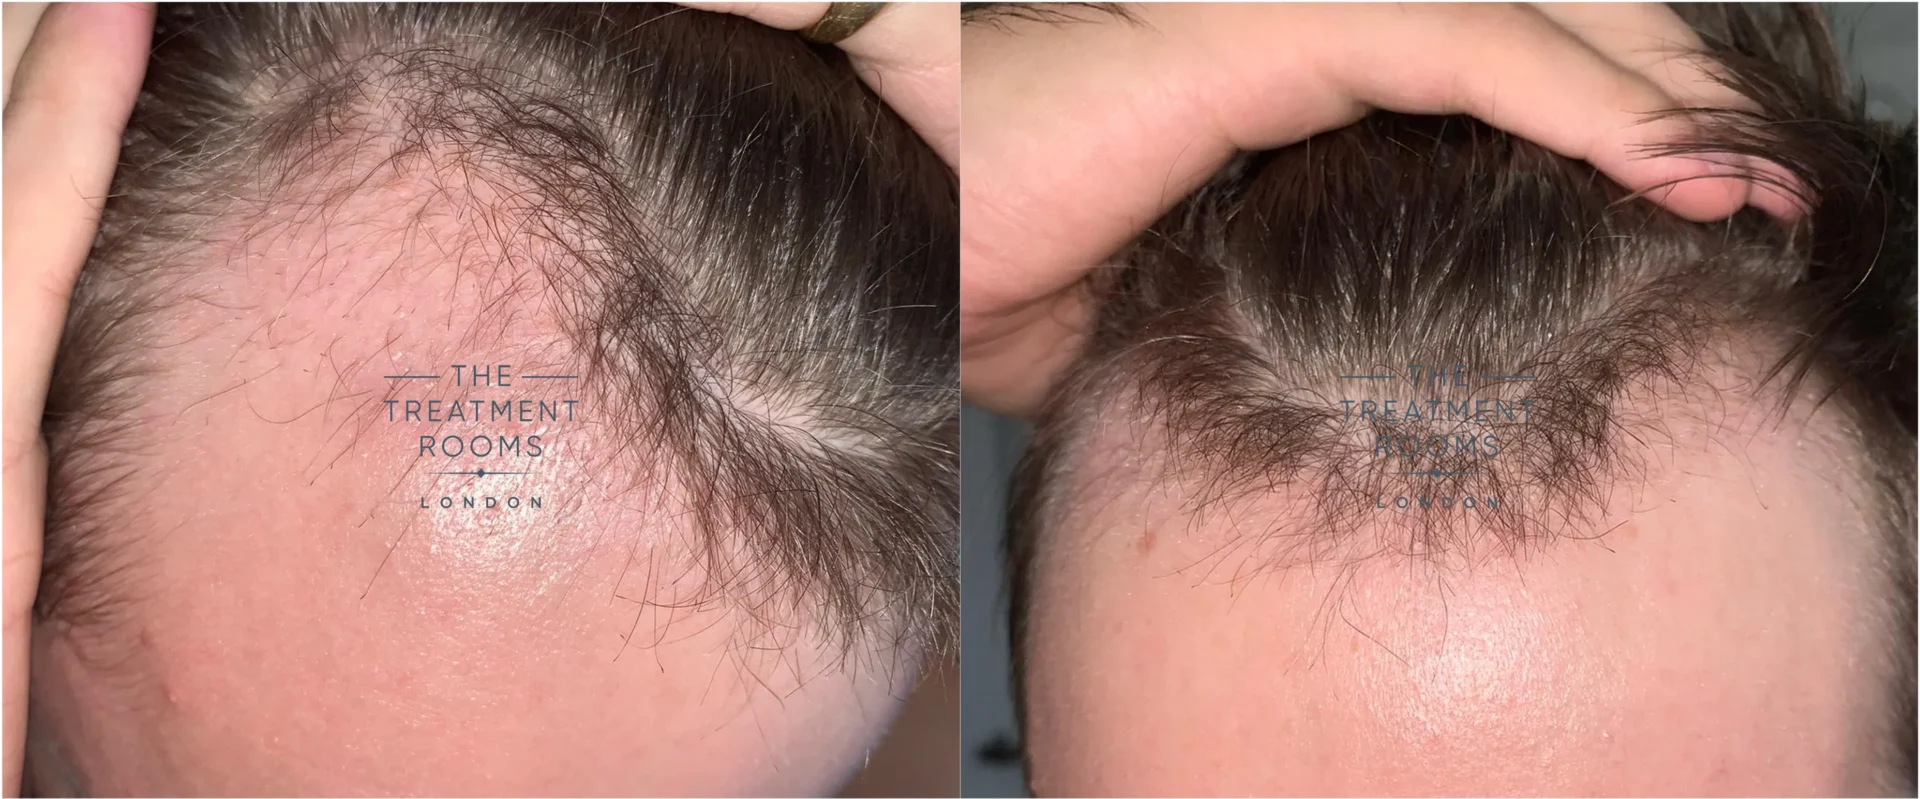 Unshaven hair transplant month 2 after surgery